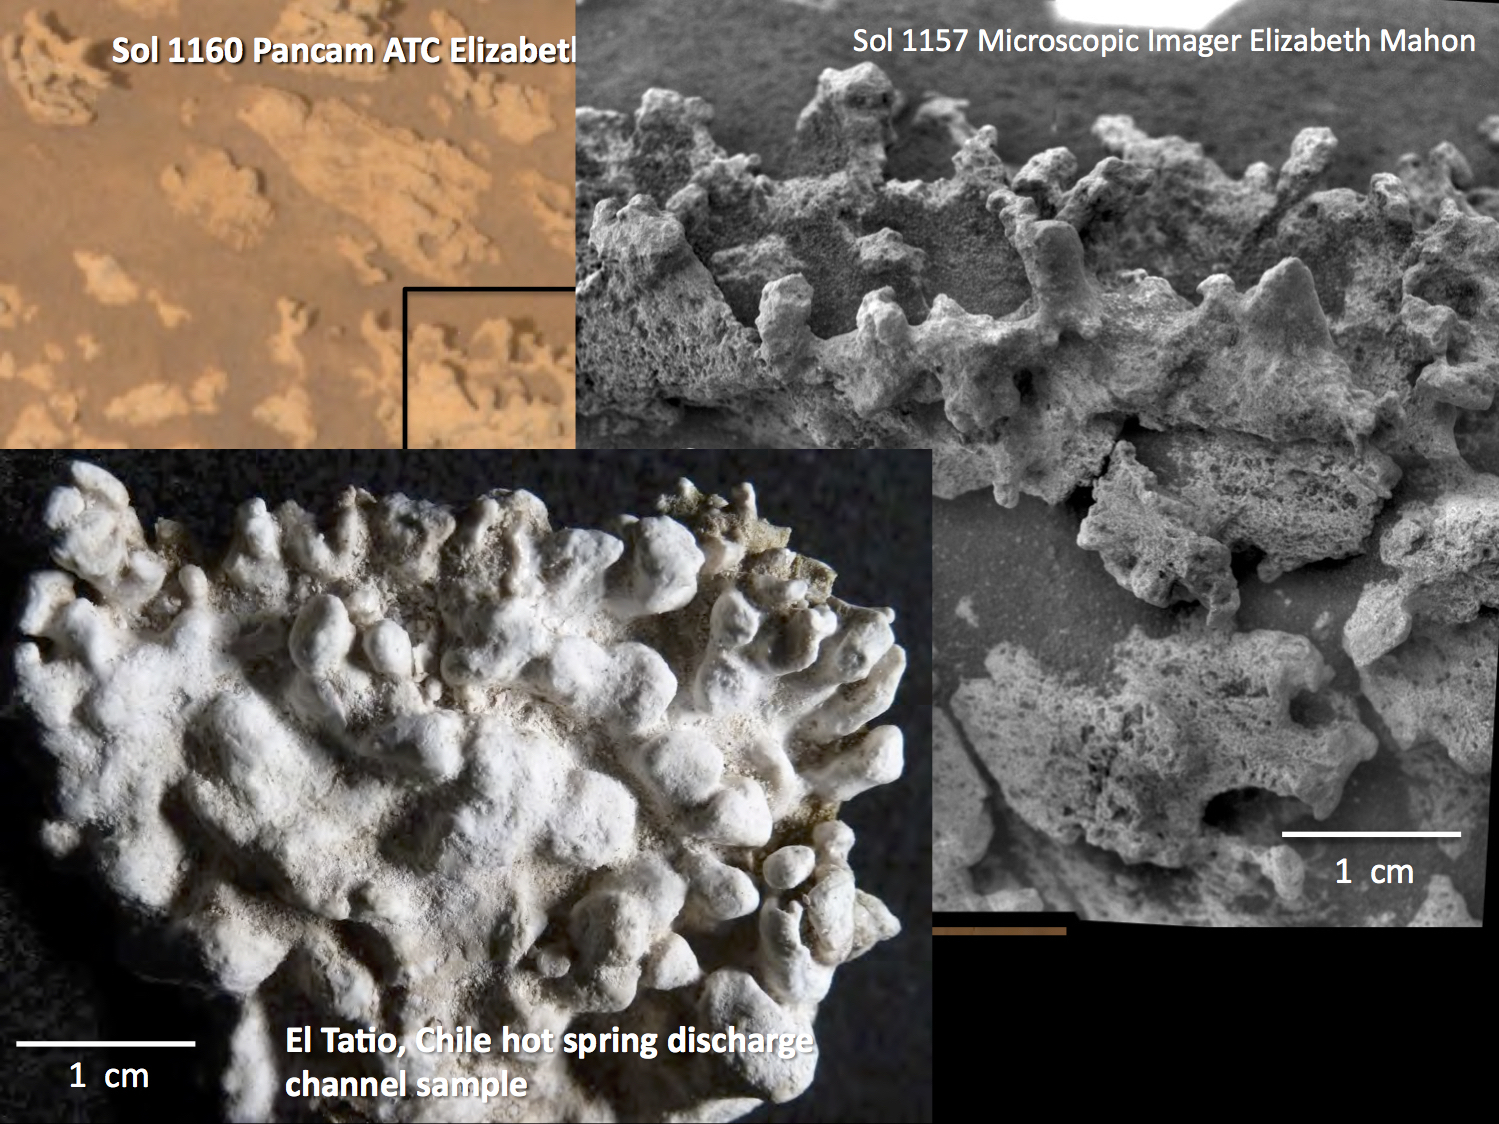 Microscopic Imager view of silica formations on Mars compared to ones from El Tatio in the Atacama Desert, Chile. Image Credit: Elizabeth Mahon